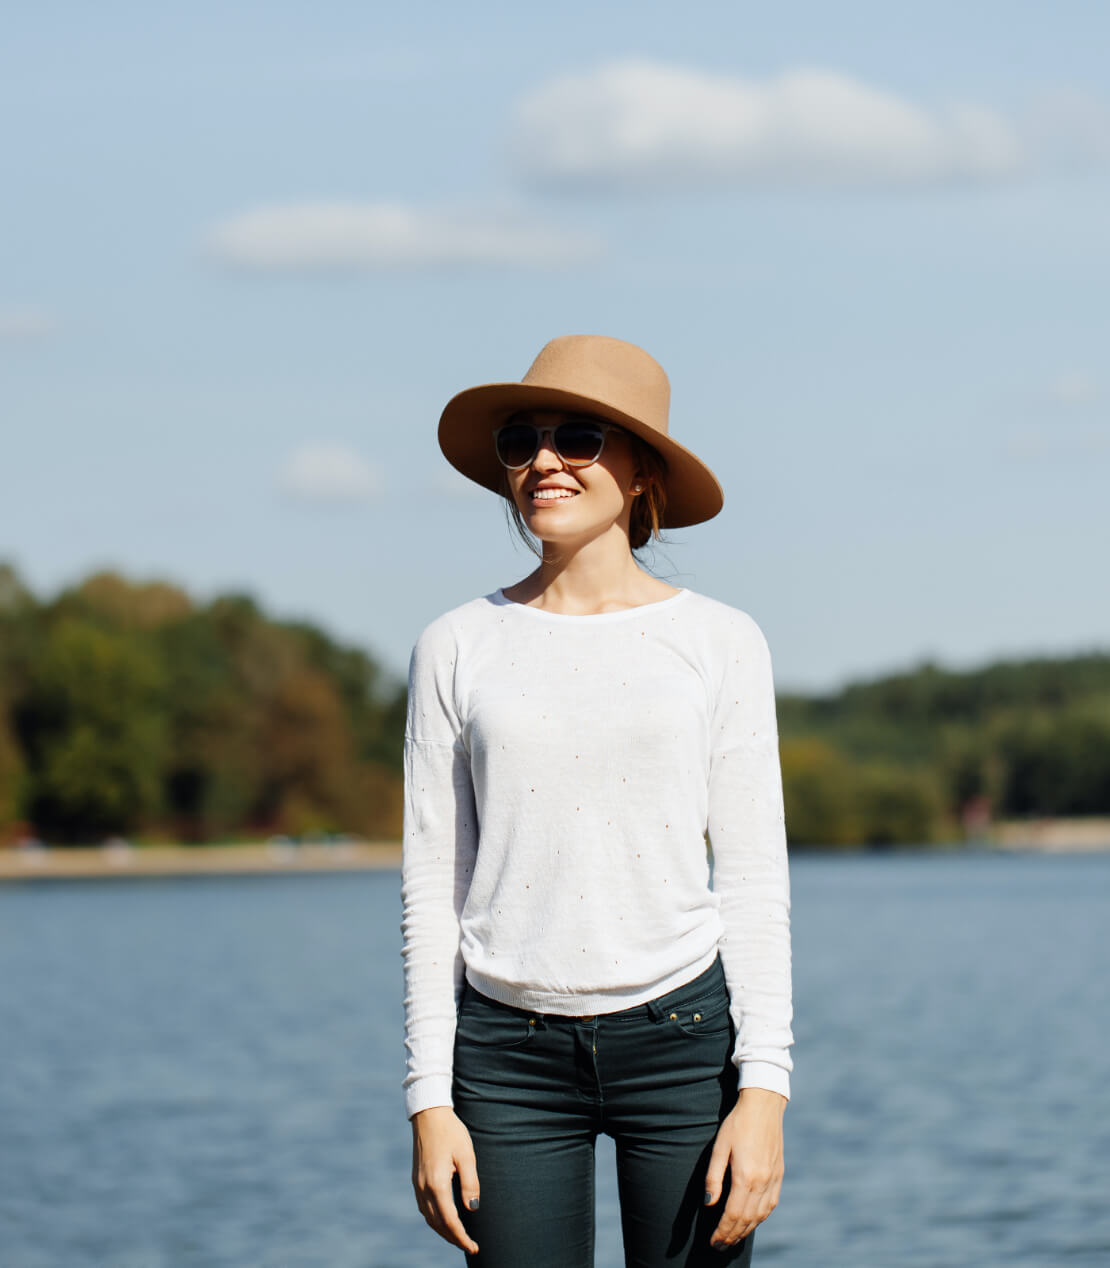 Woman with hat and sunglasses in front of lake.